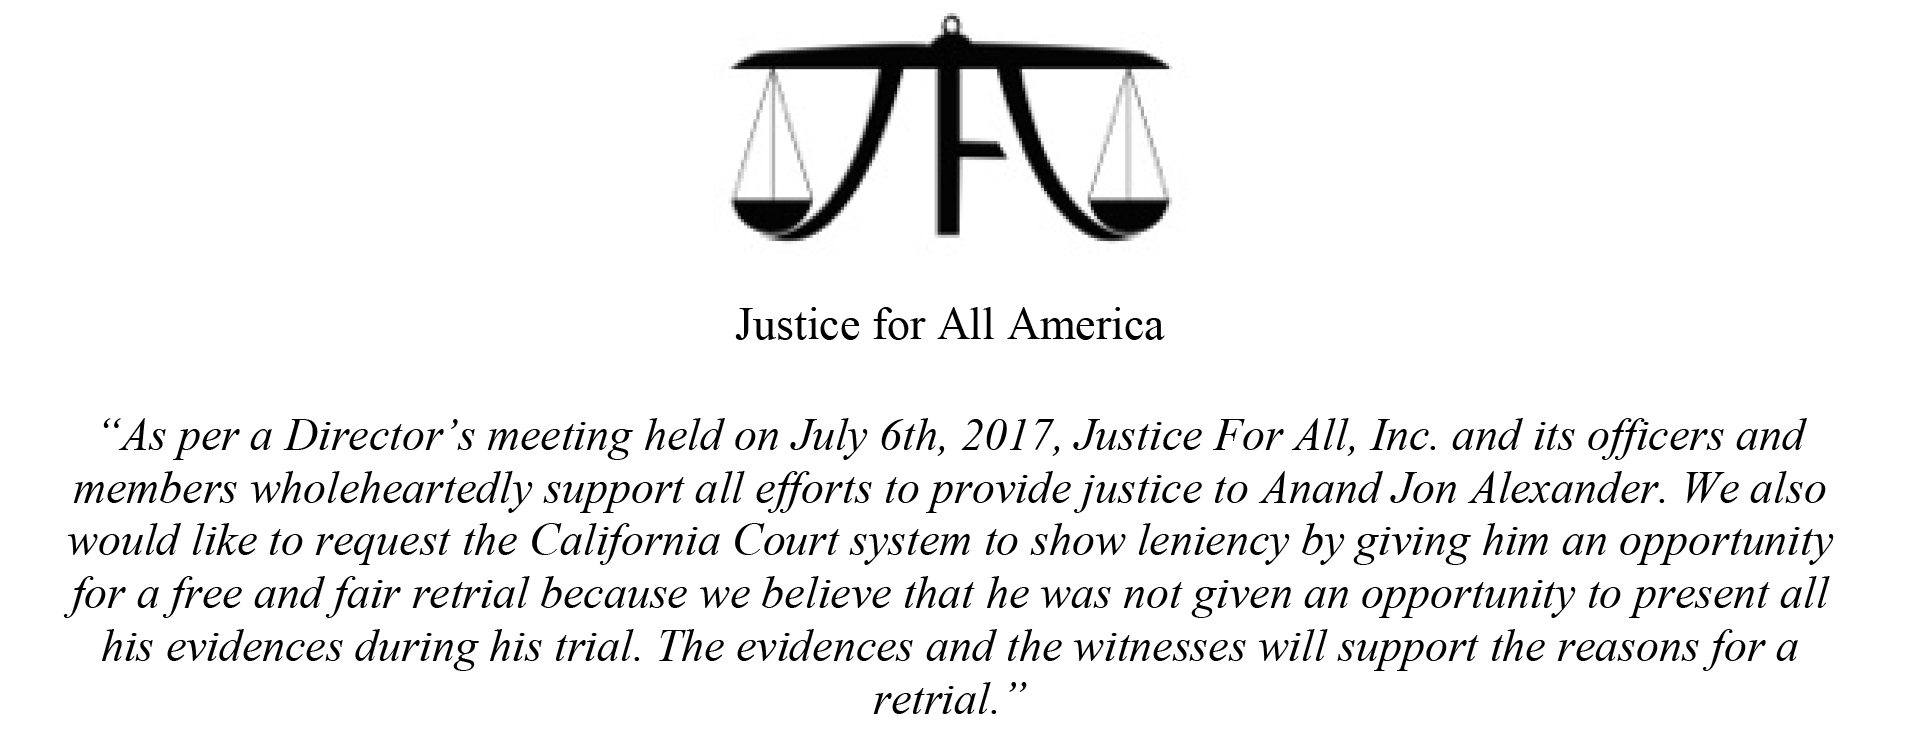 Justice for All America